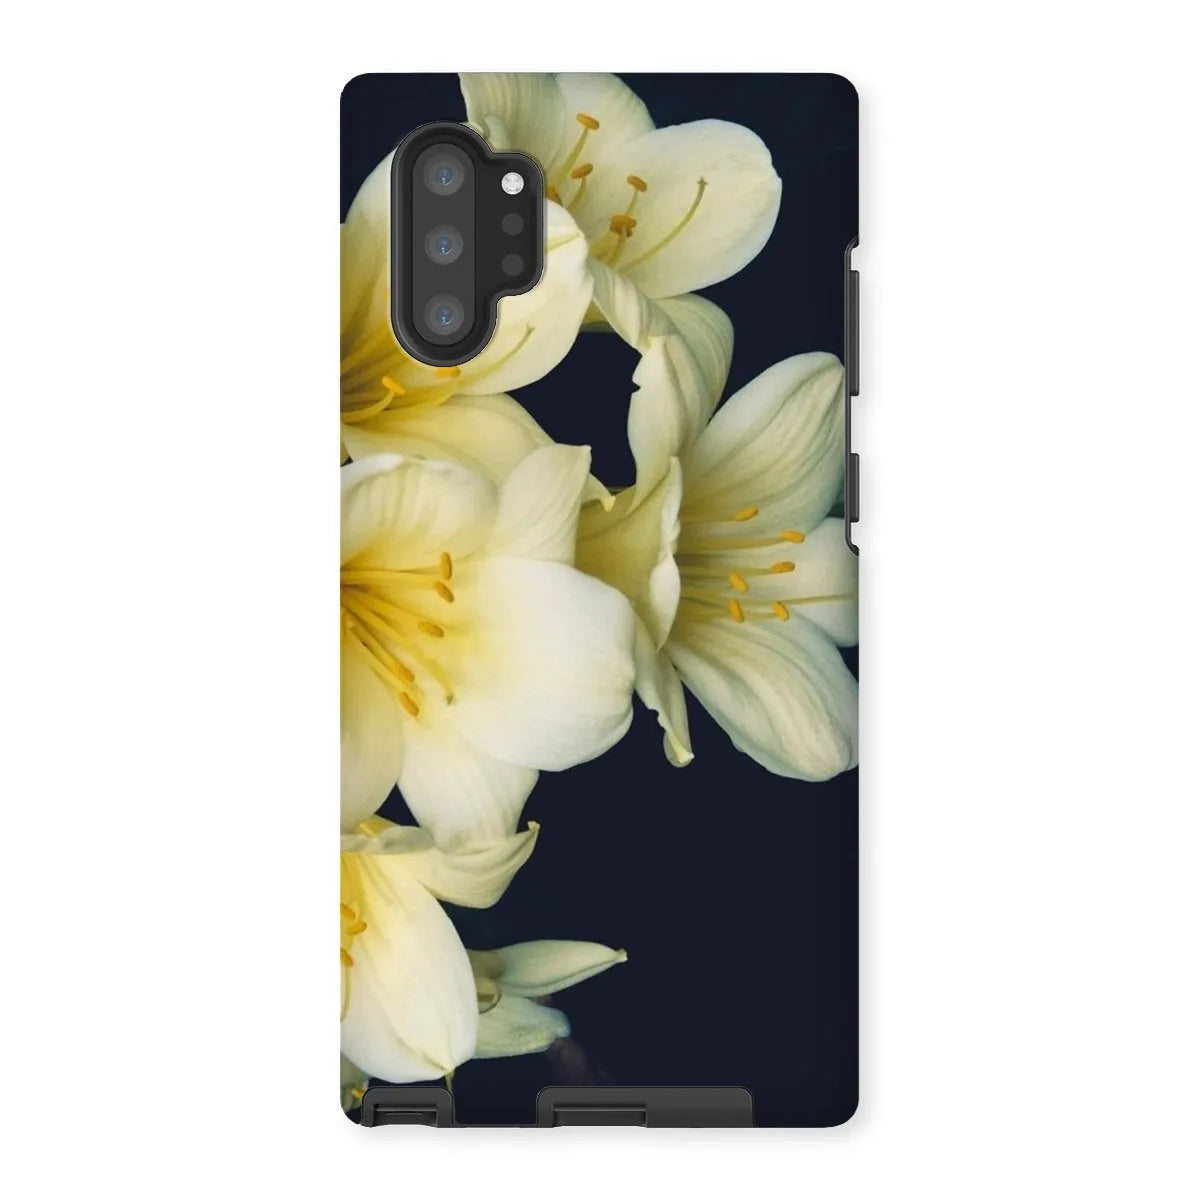 Flower Power Too Tough Phone Case - Samsung Galaxy Note 10p / Matte - Mobile Phone Cases - Aesthetic Art